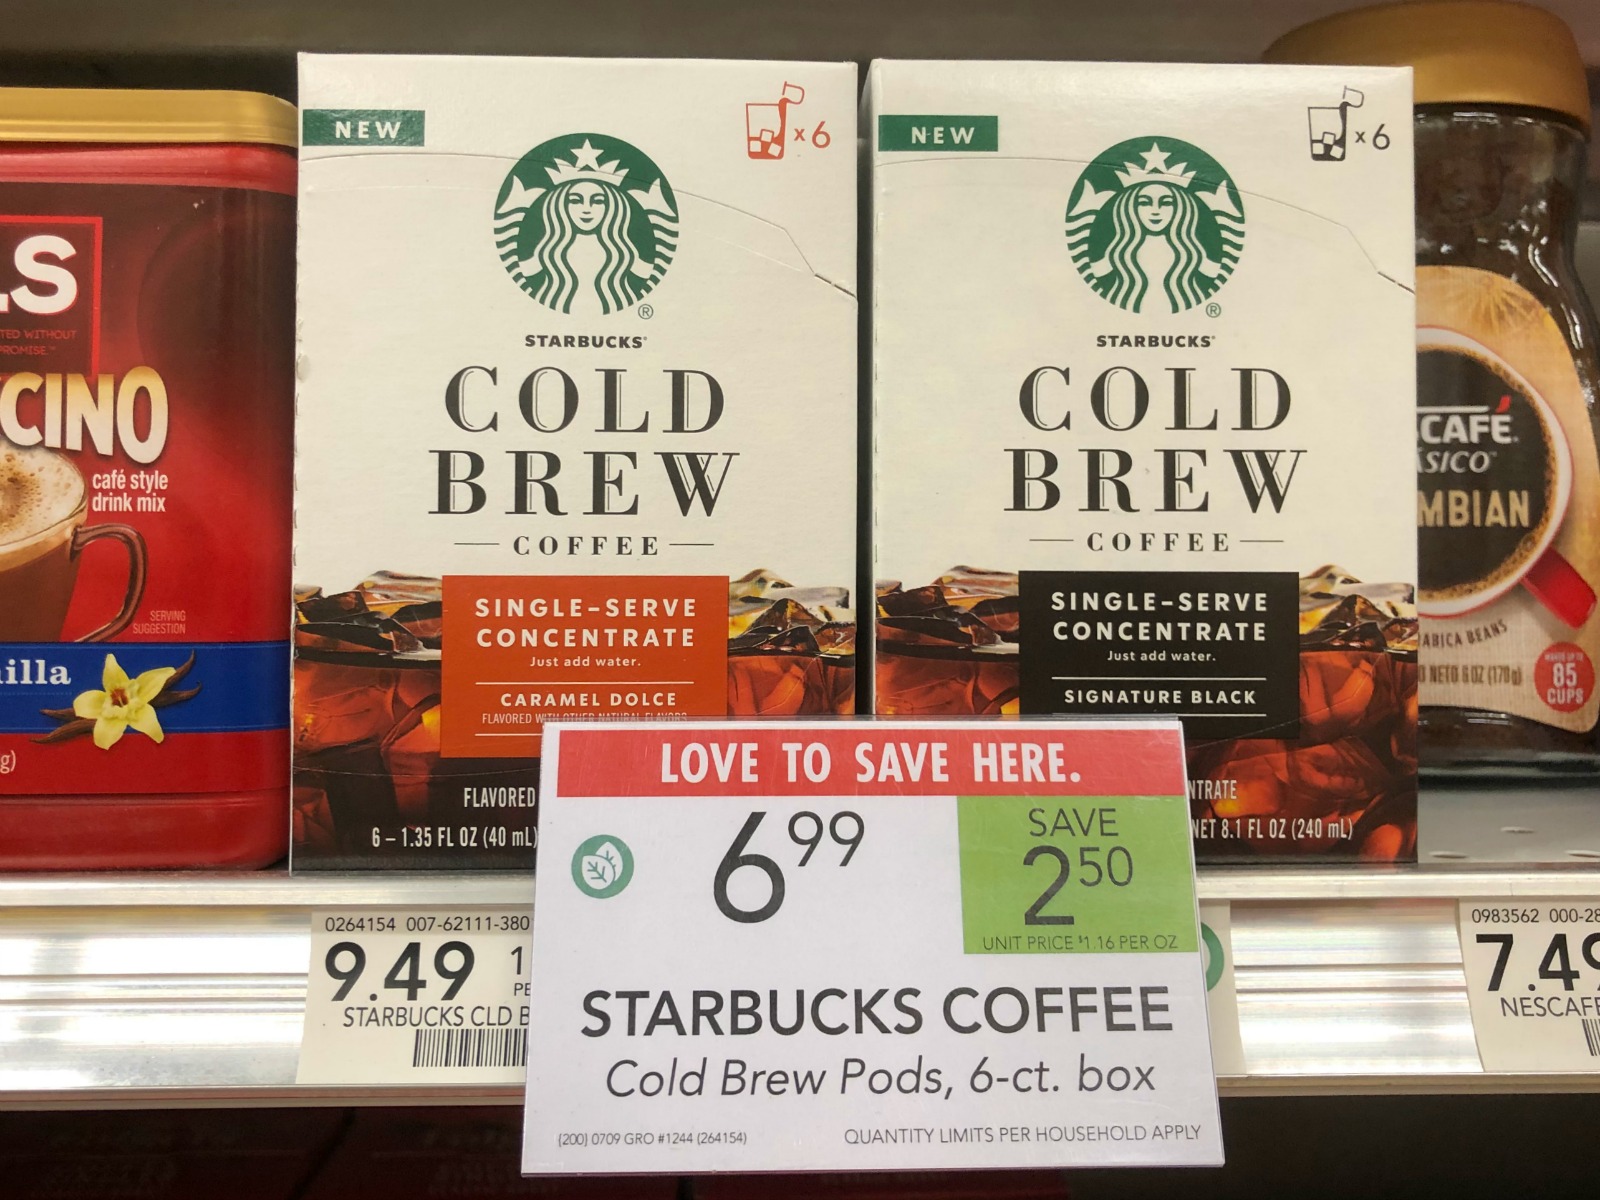 Enjoy The Refreshing Taste Of Starbucks Cold Brew Concentrates & Save Now At Publix on I Heart Publix